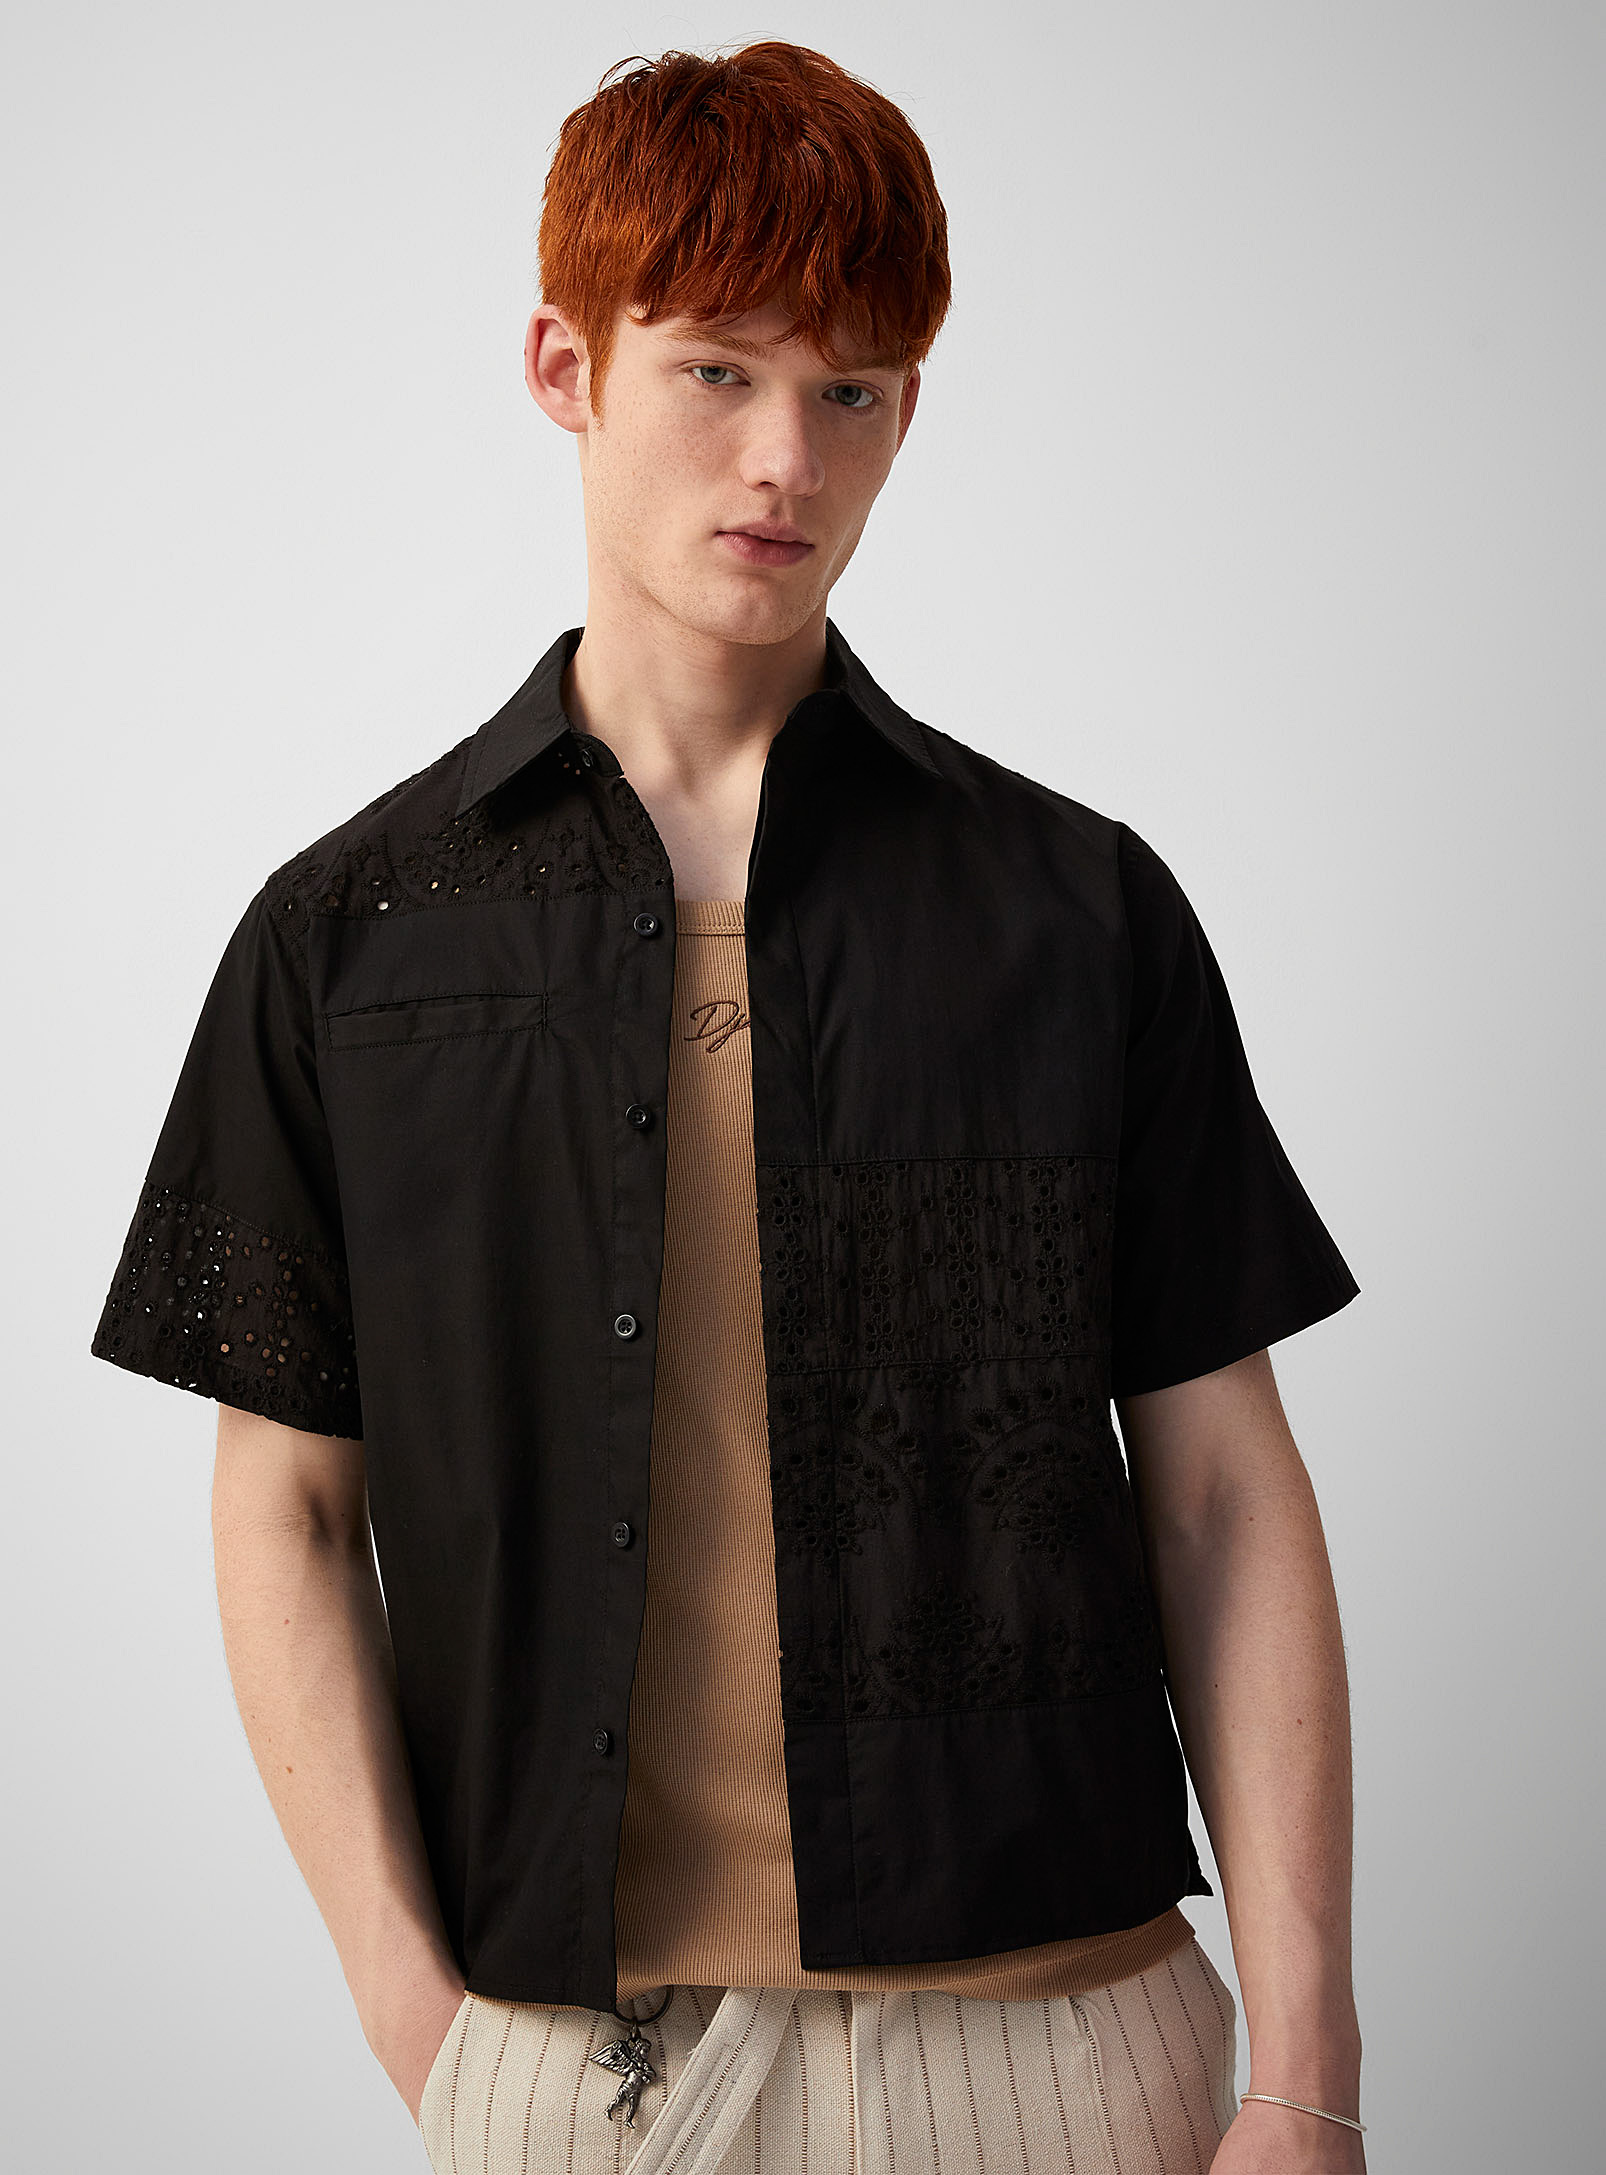 jungle - La chemise cabana accents broderie anglaise